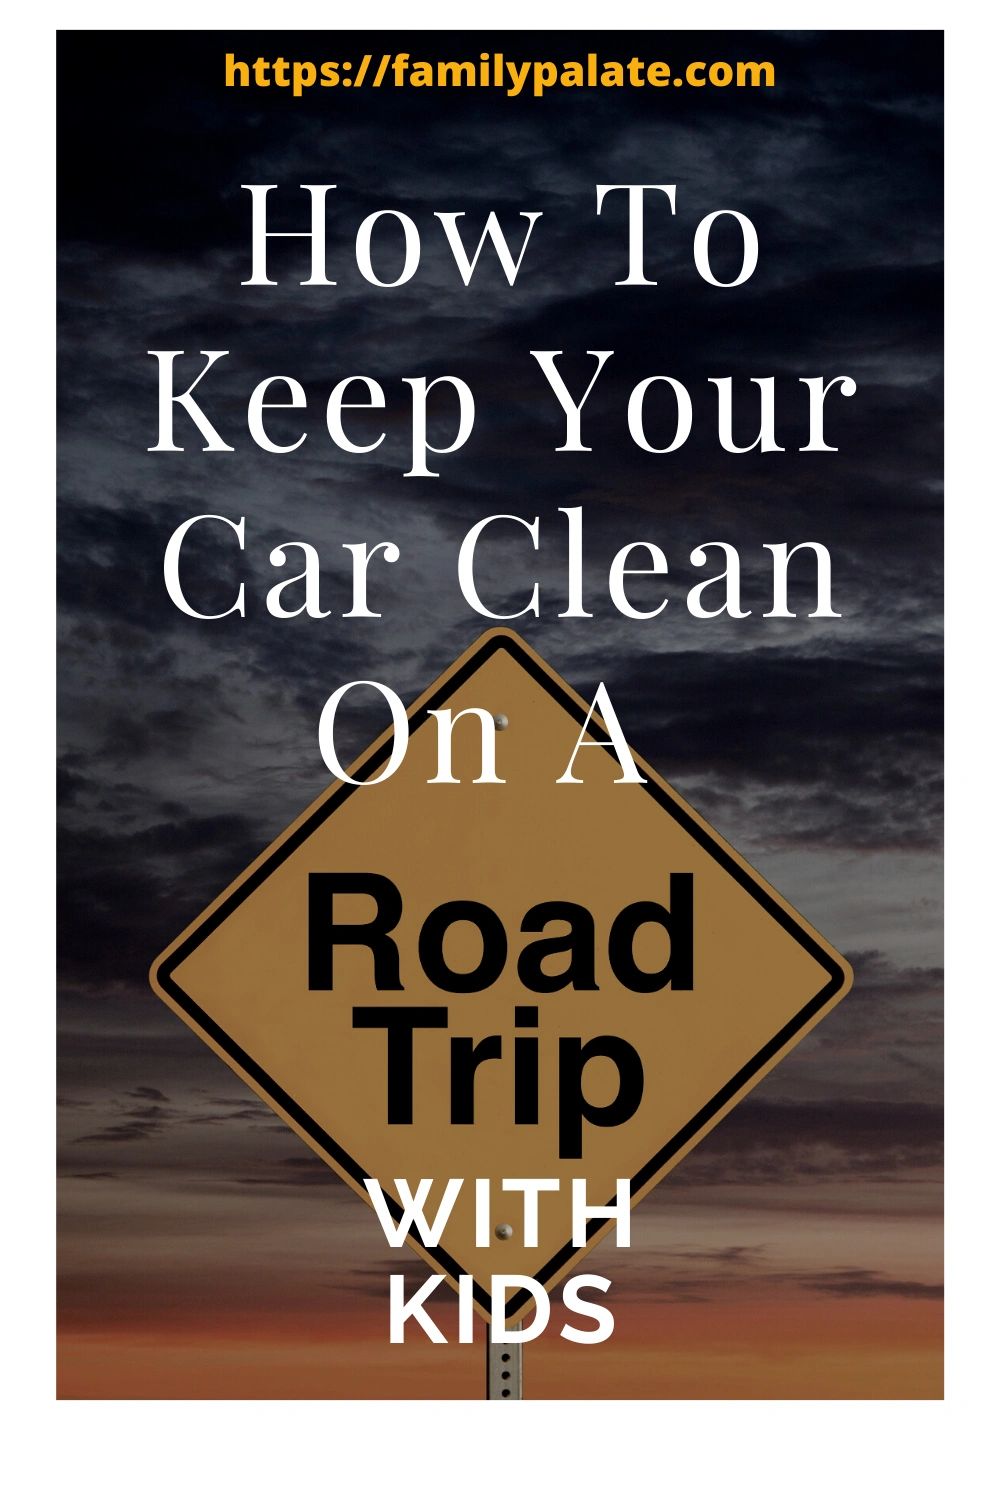 Road Tripping With Kids? Here Are 6 Tips To Keep Your Car From